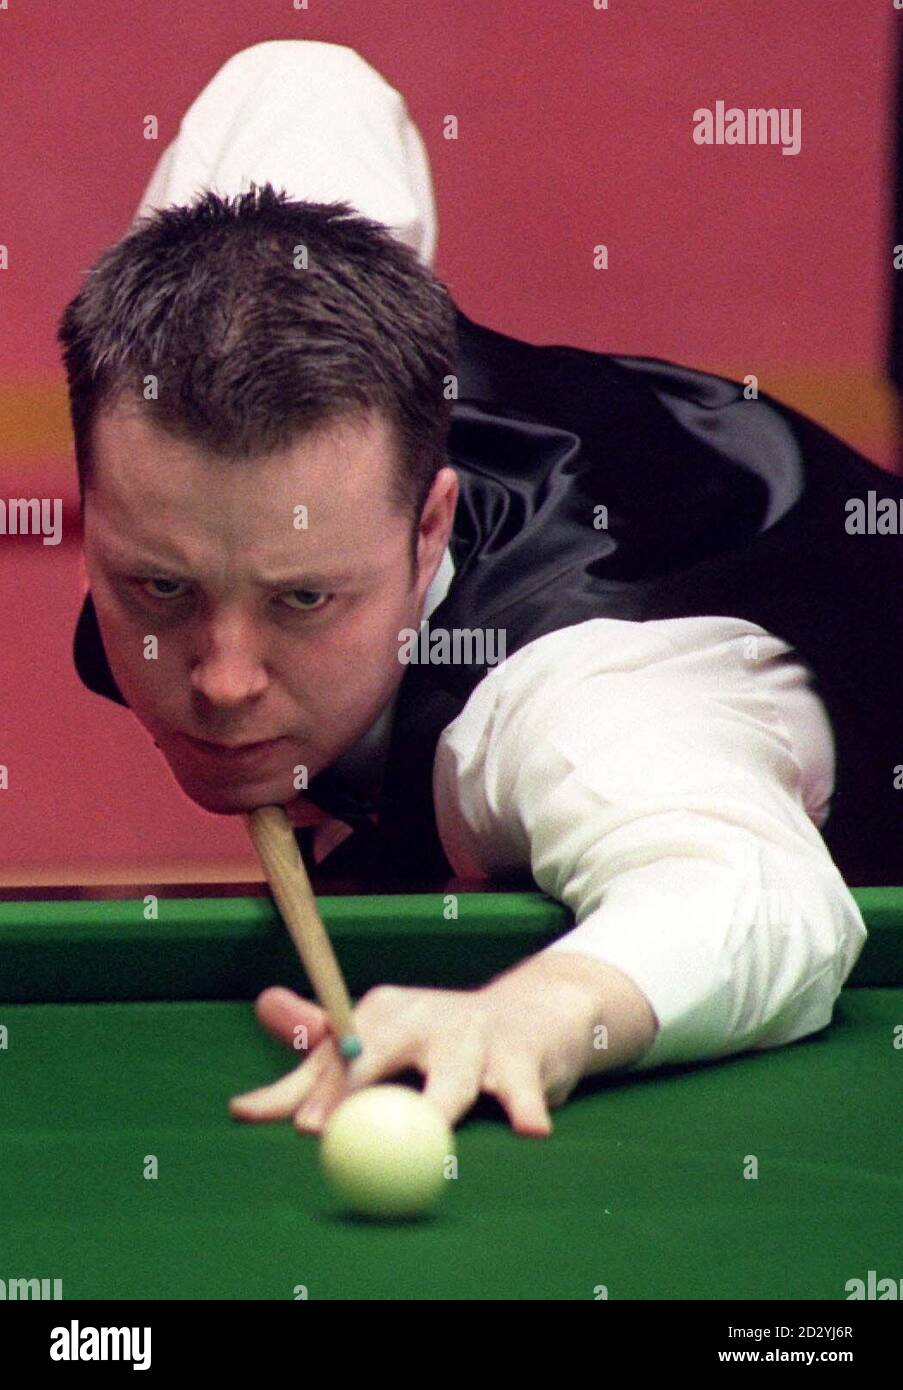 John Higgins of Scotland begins his second round match in the Embassy World Snooker Championships against Anthony Hamilton at the Crucible, Sheffield today (Thursday)